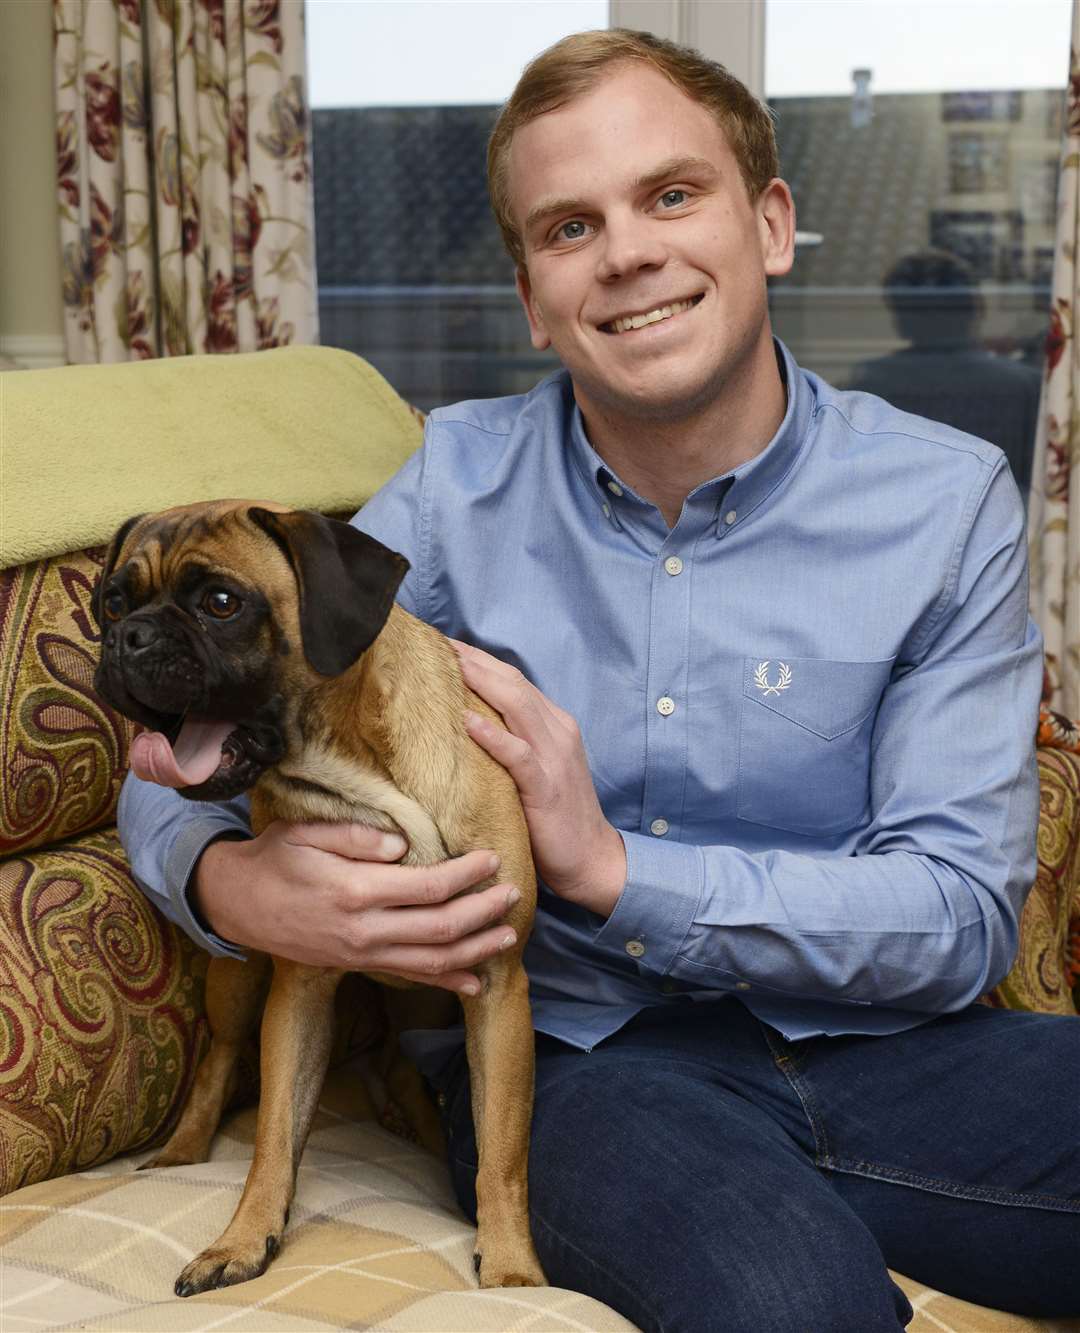 Toby with his beloved dog Simba